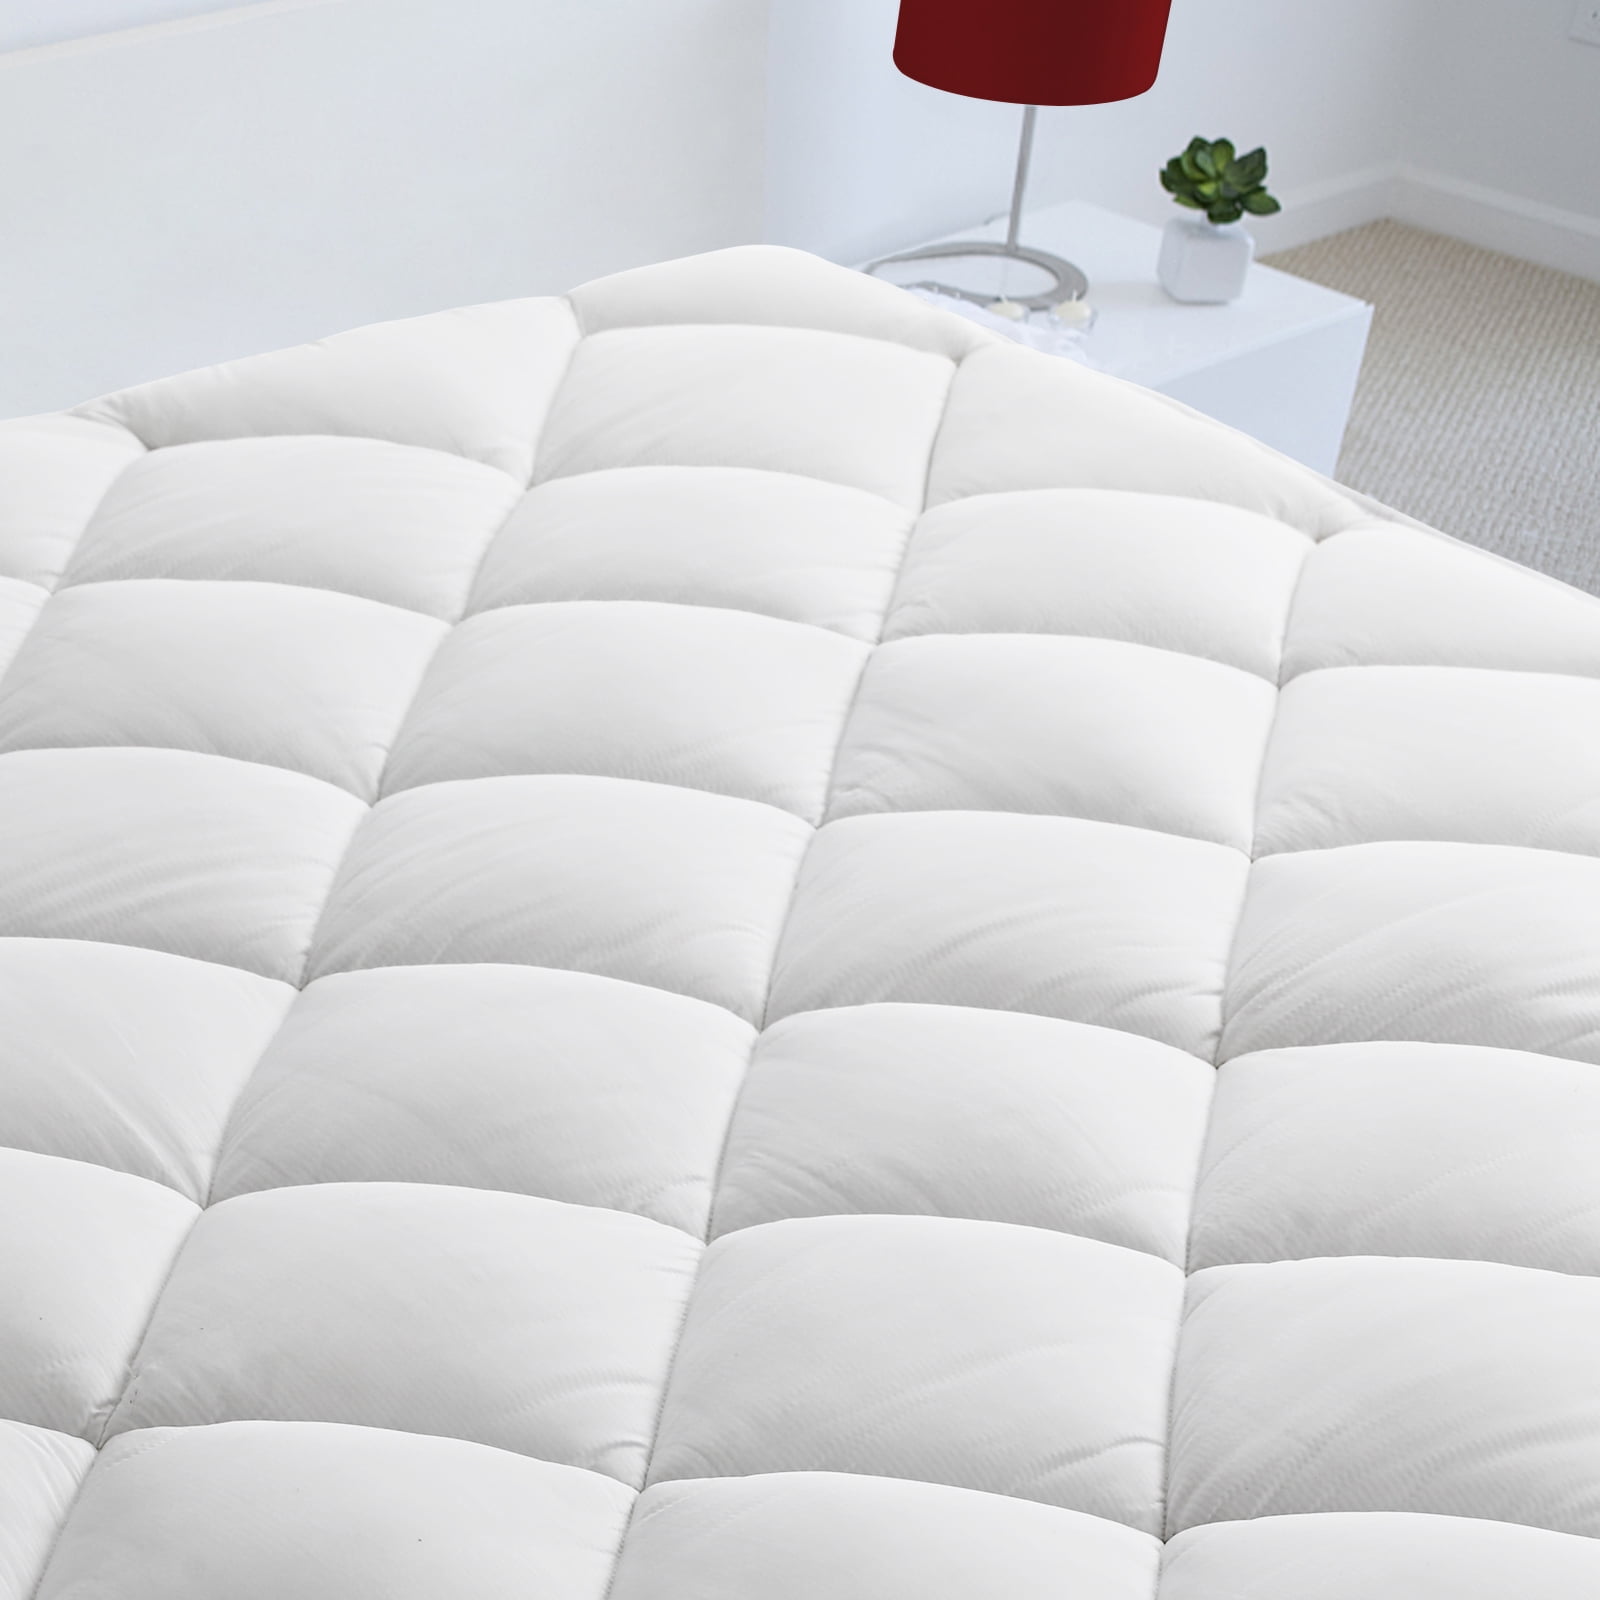 SOPAT Reversible Twin Size Quilted Mattress Pad Cover Topper Pillow Top Mattress  Protector with Fitted Deep Pocket 8-21, Cotton Fabric, Soft and  Comfortable (39 x 75) 